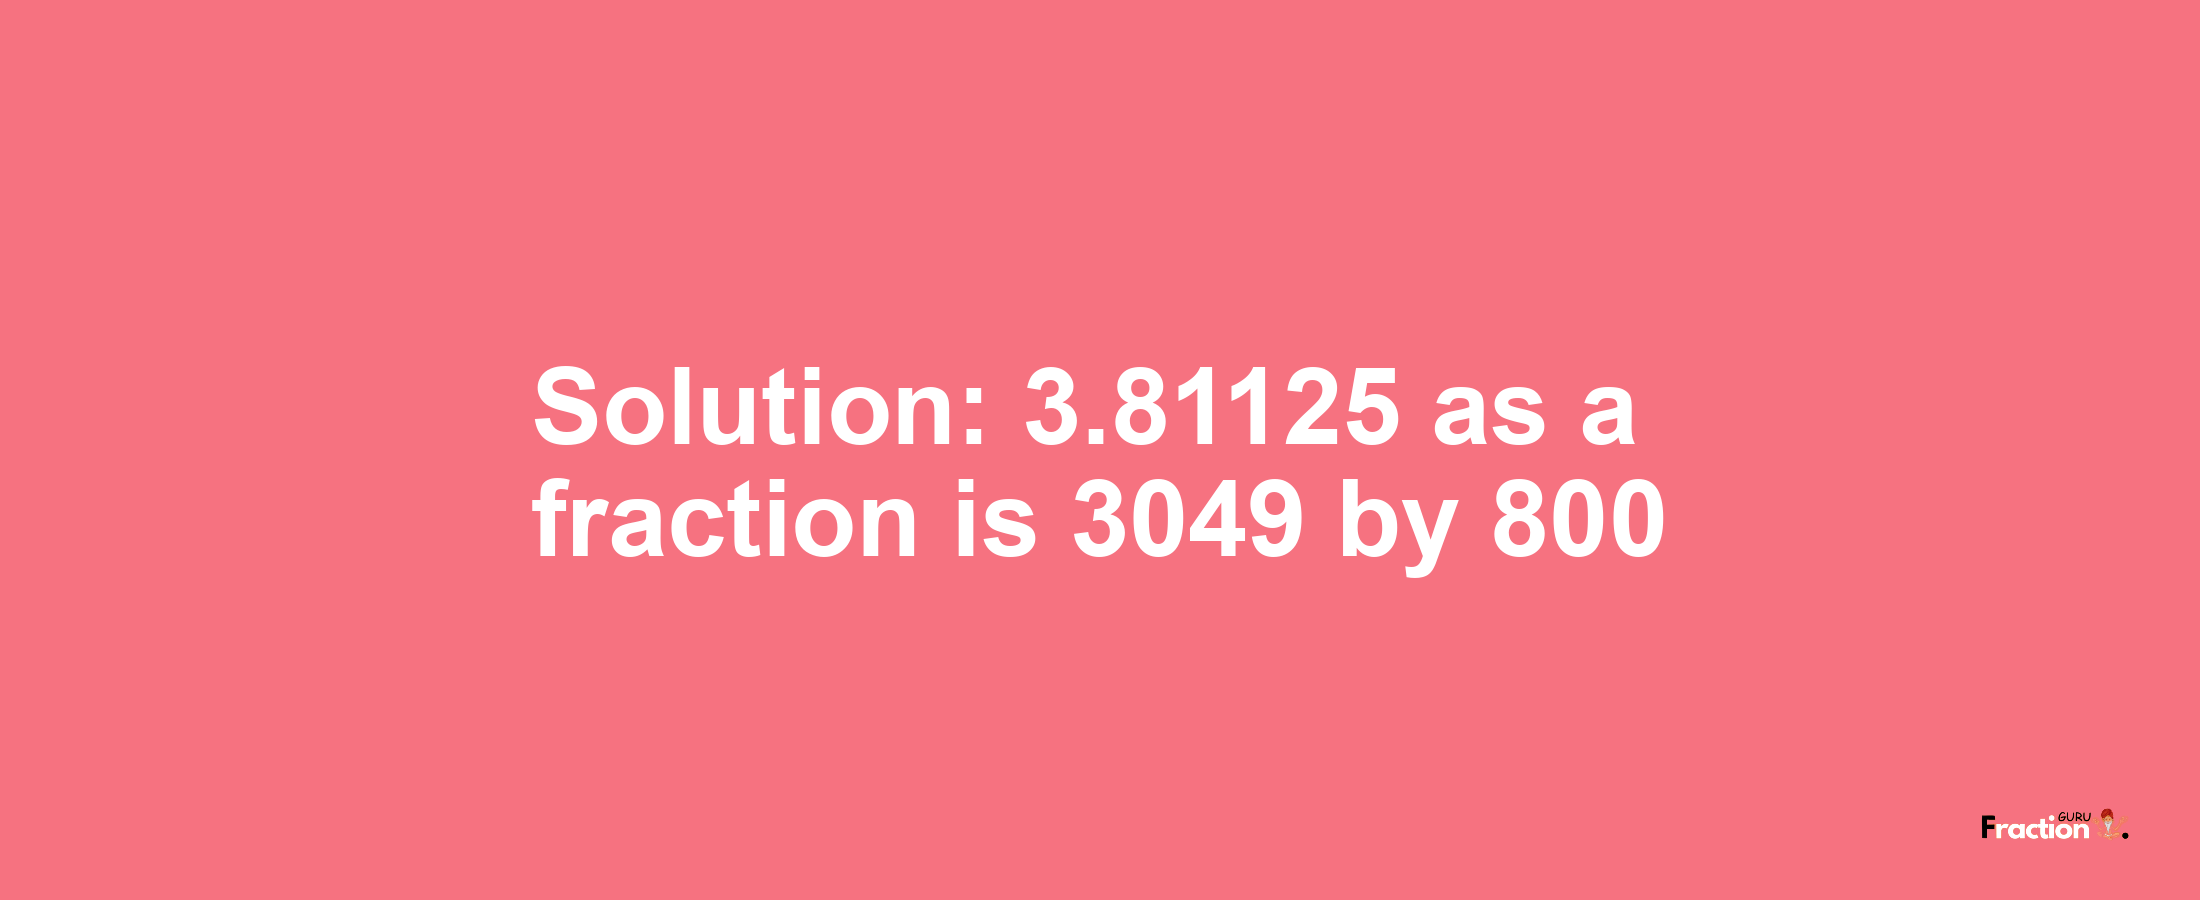 Solution:3.81125 as a fraction is 3049/800